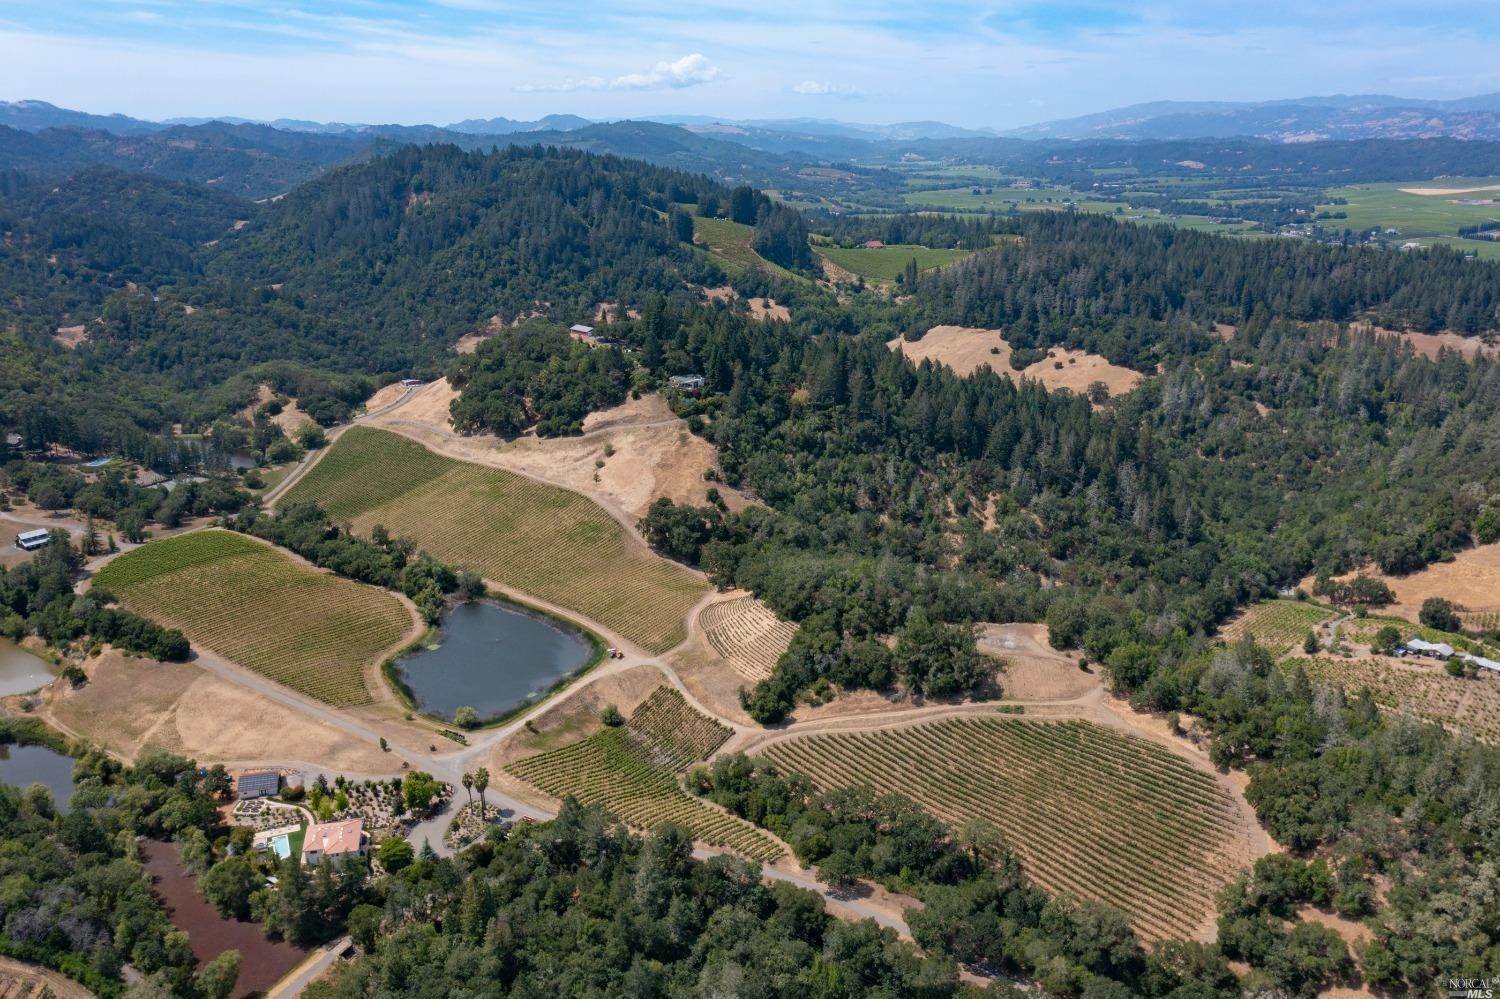 Agricultural Land for Sale at 2337 W Dry Creek Road Healdsburg, California 95448 United States